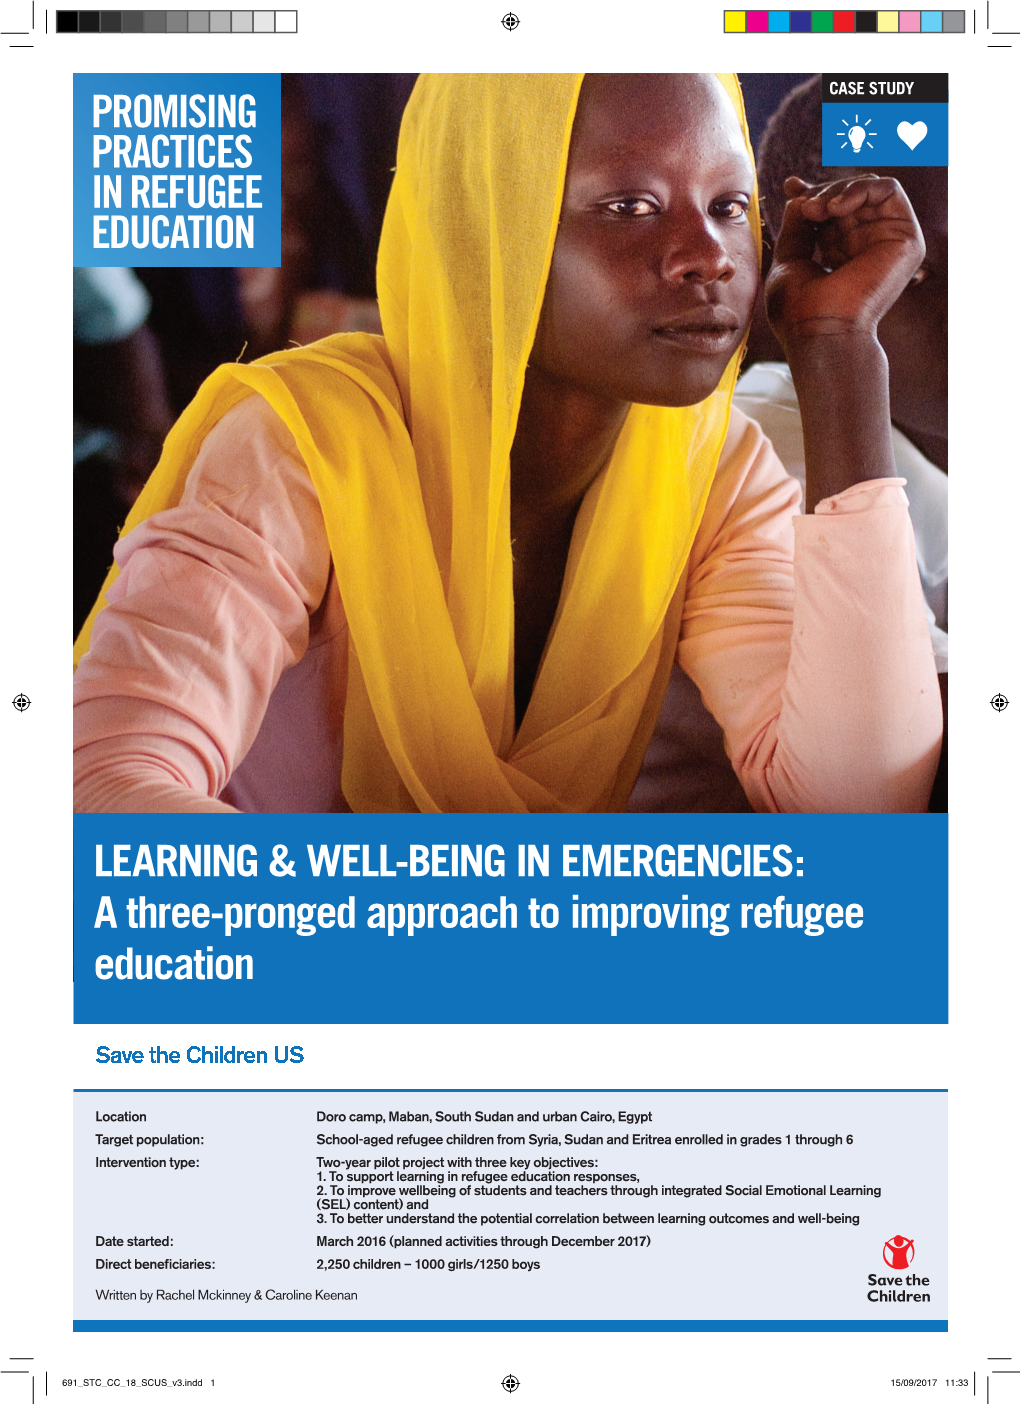 A Three-Pronged Approach to Improving Refugee Education